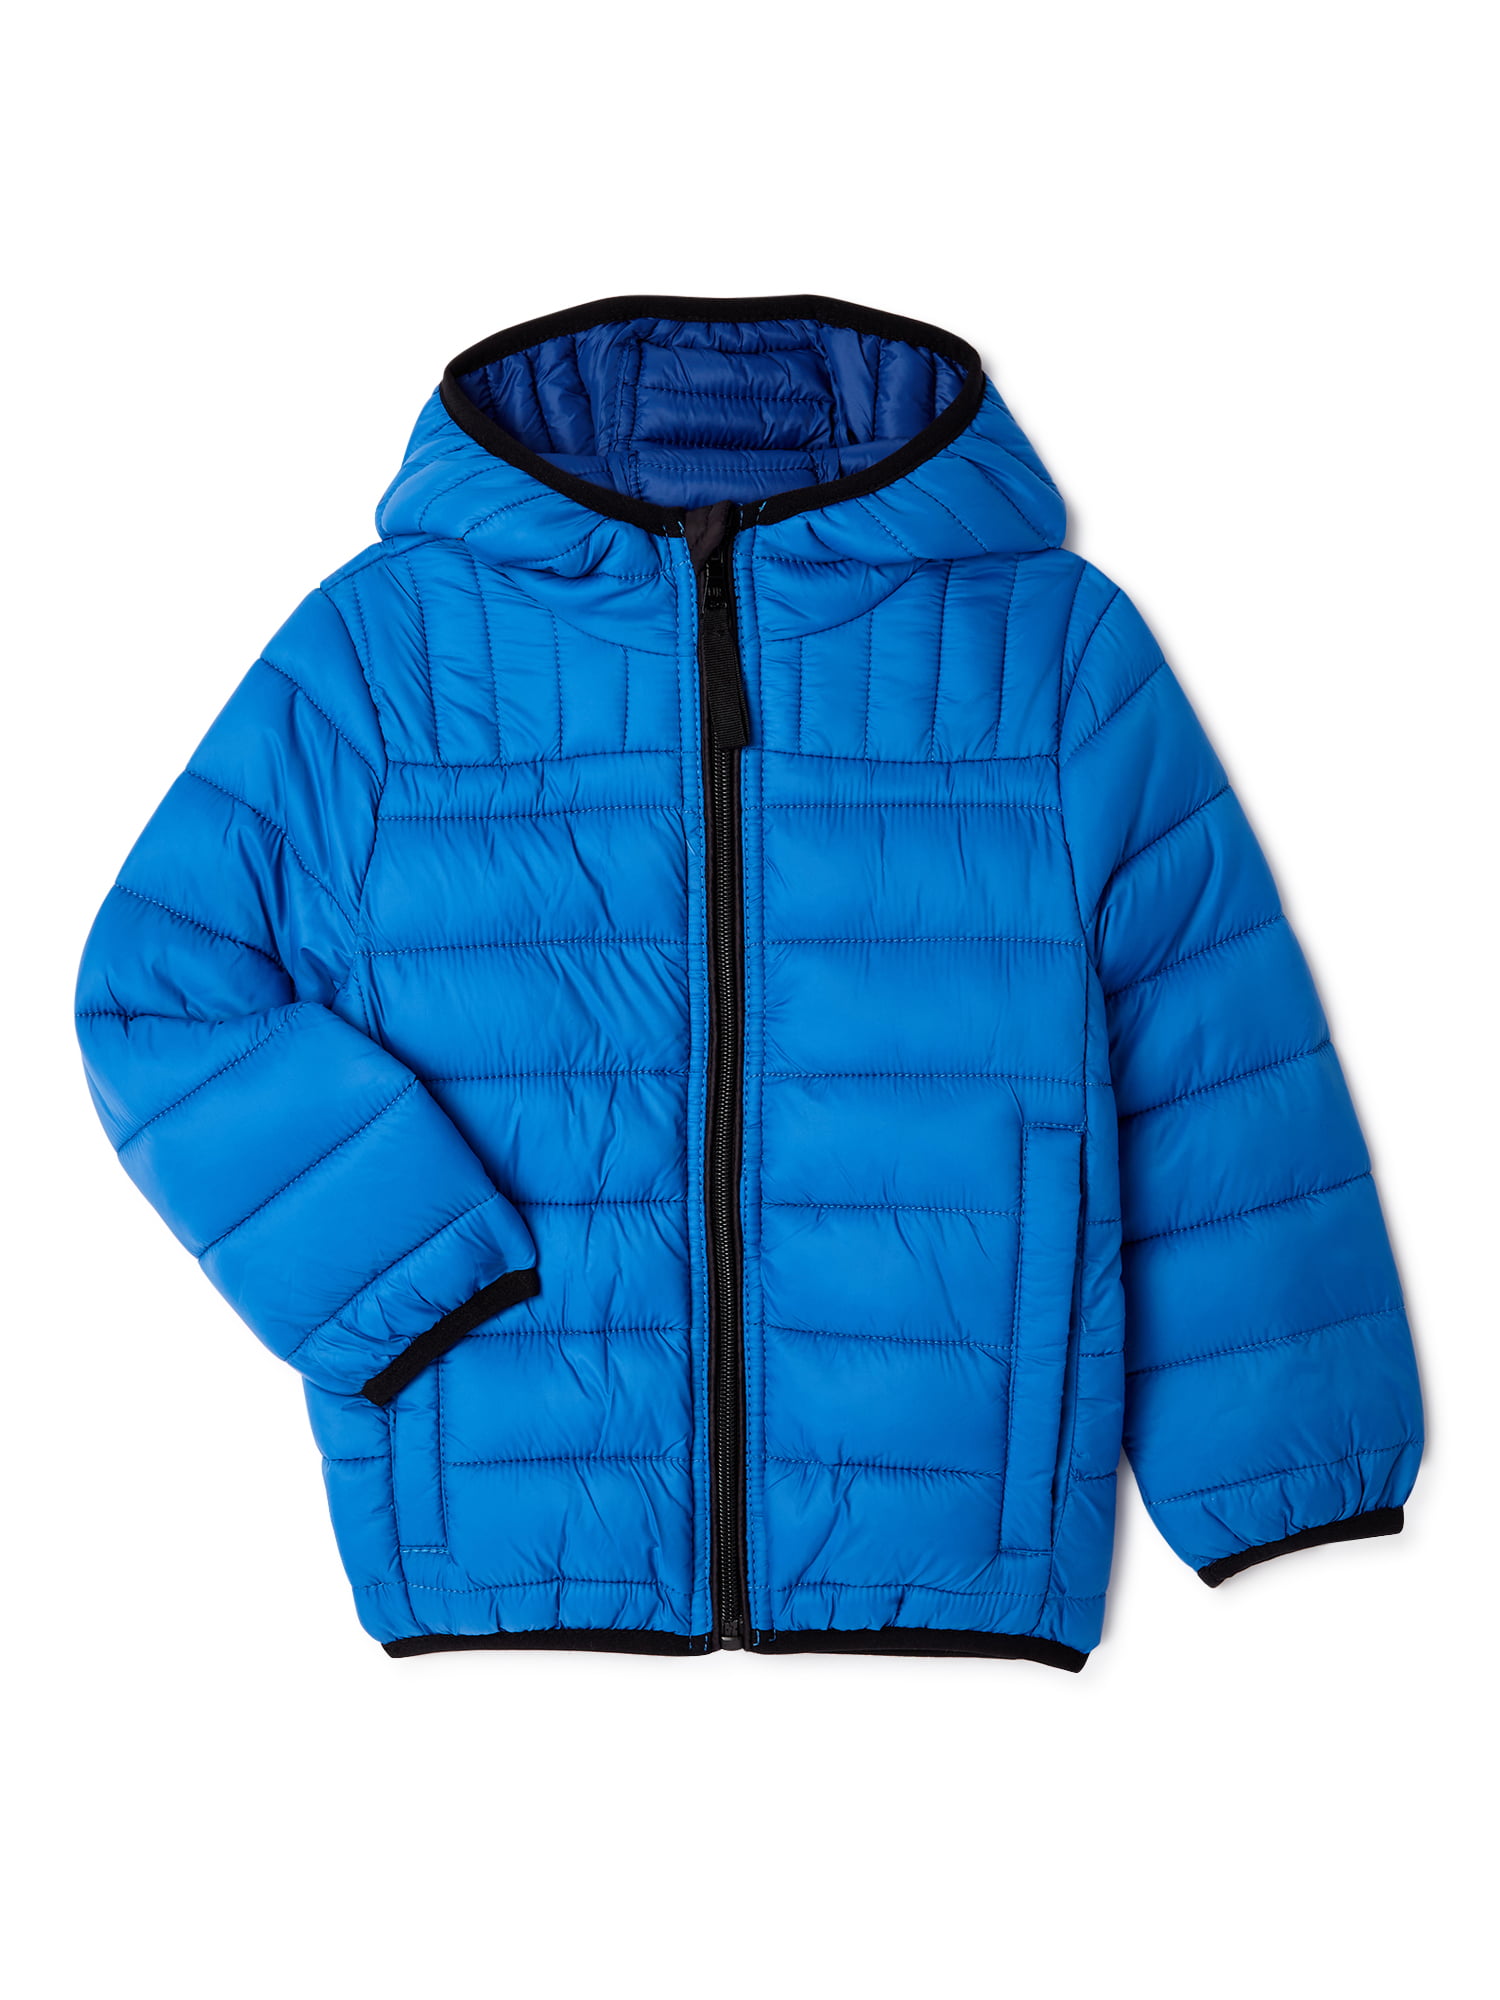 Urban Republic Baby & Toddler Boys Packable Puffer Jacket, Sizes 12M-4T ...